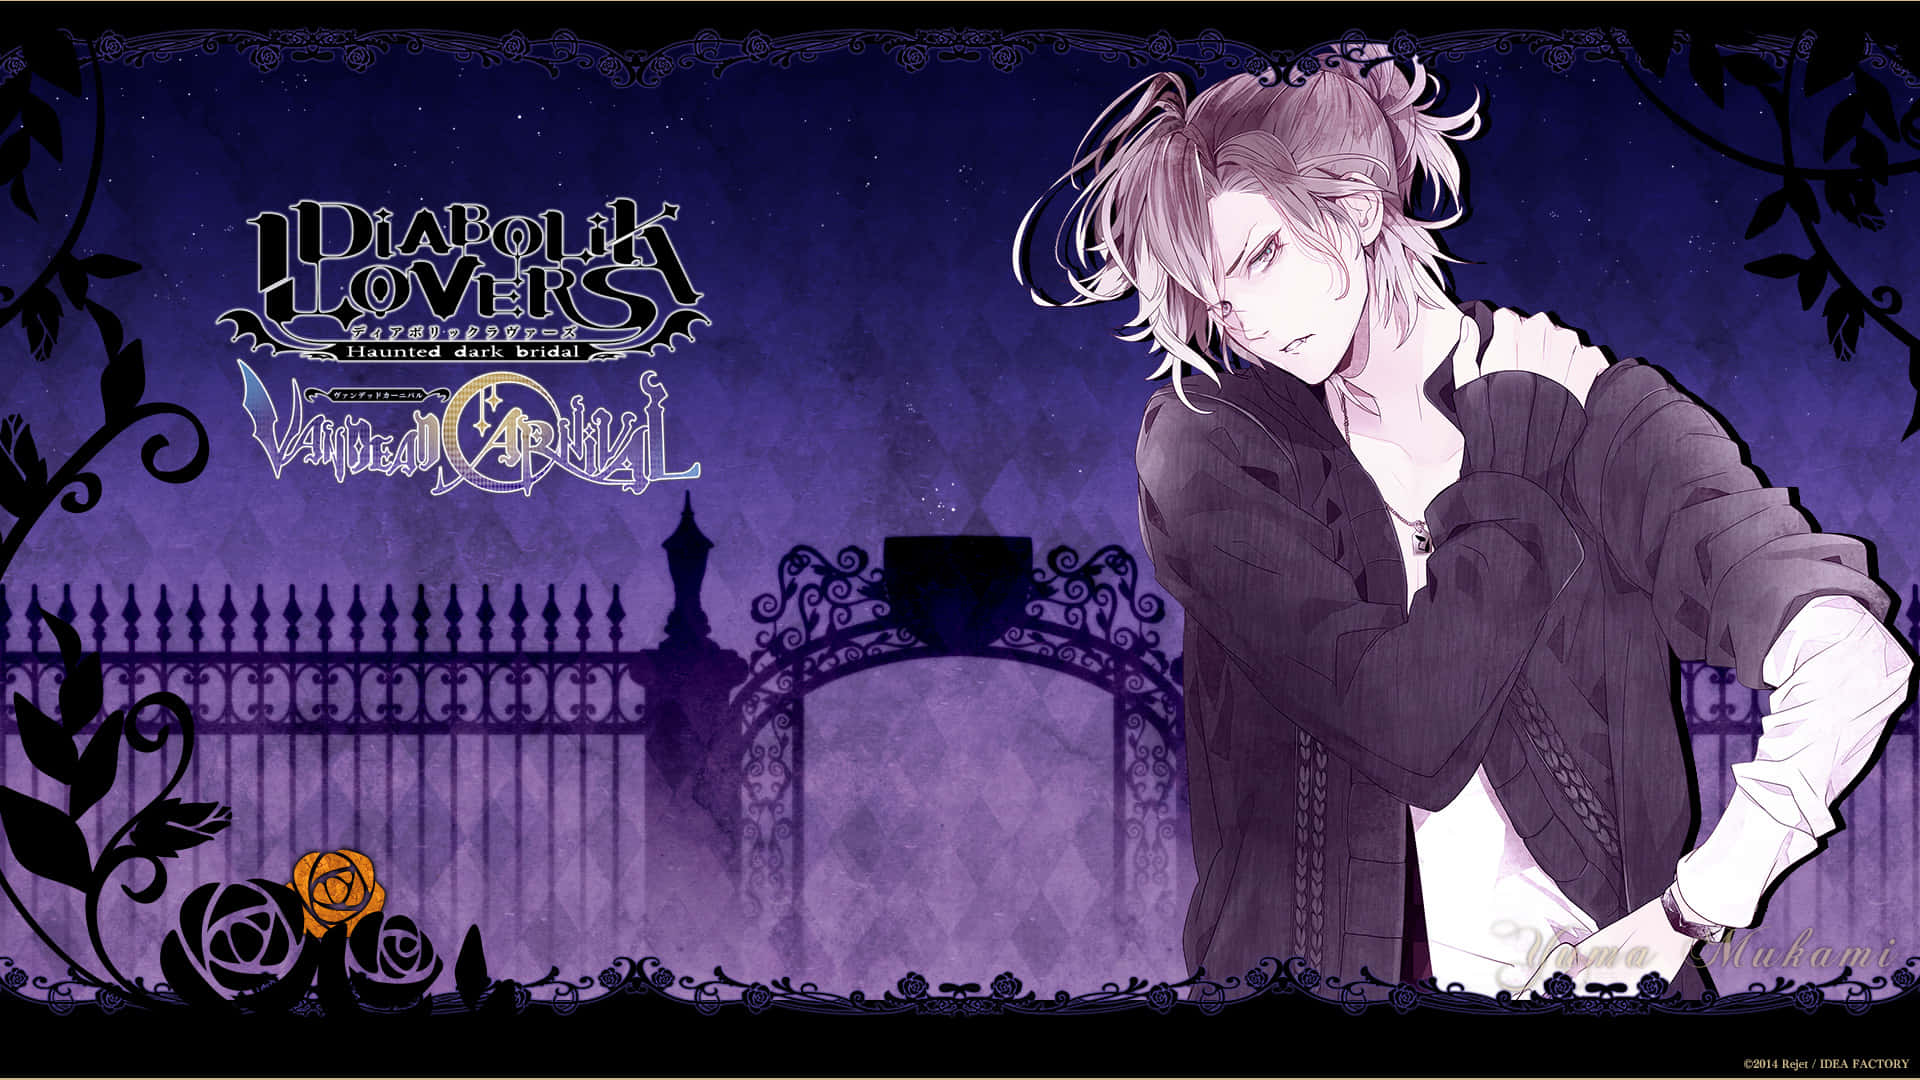 Picture  Seductive Demons and Gothic Cathedrals - Welcome to the Japanese Anime World of Diabolik Lovers